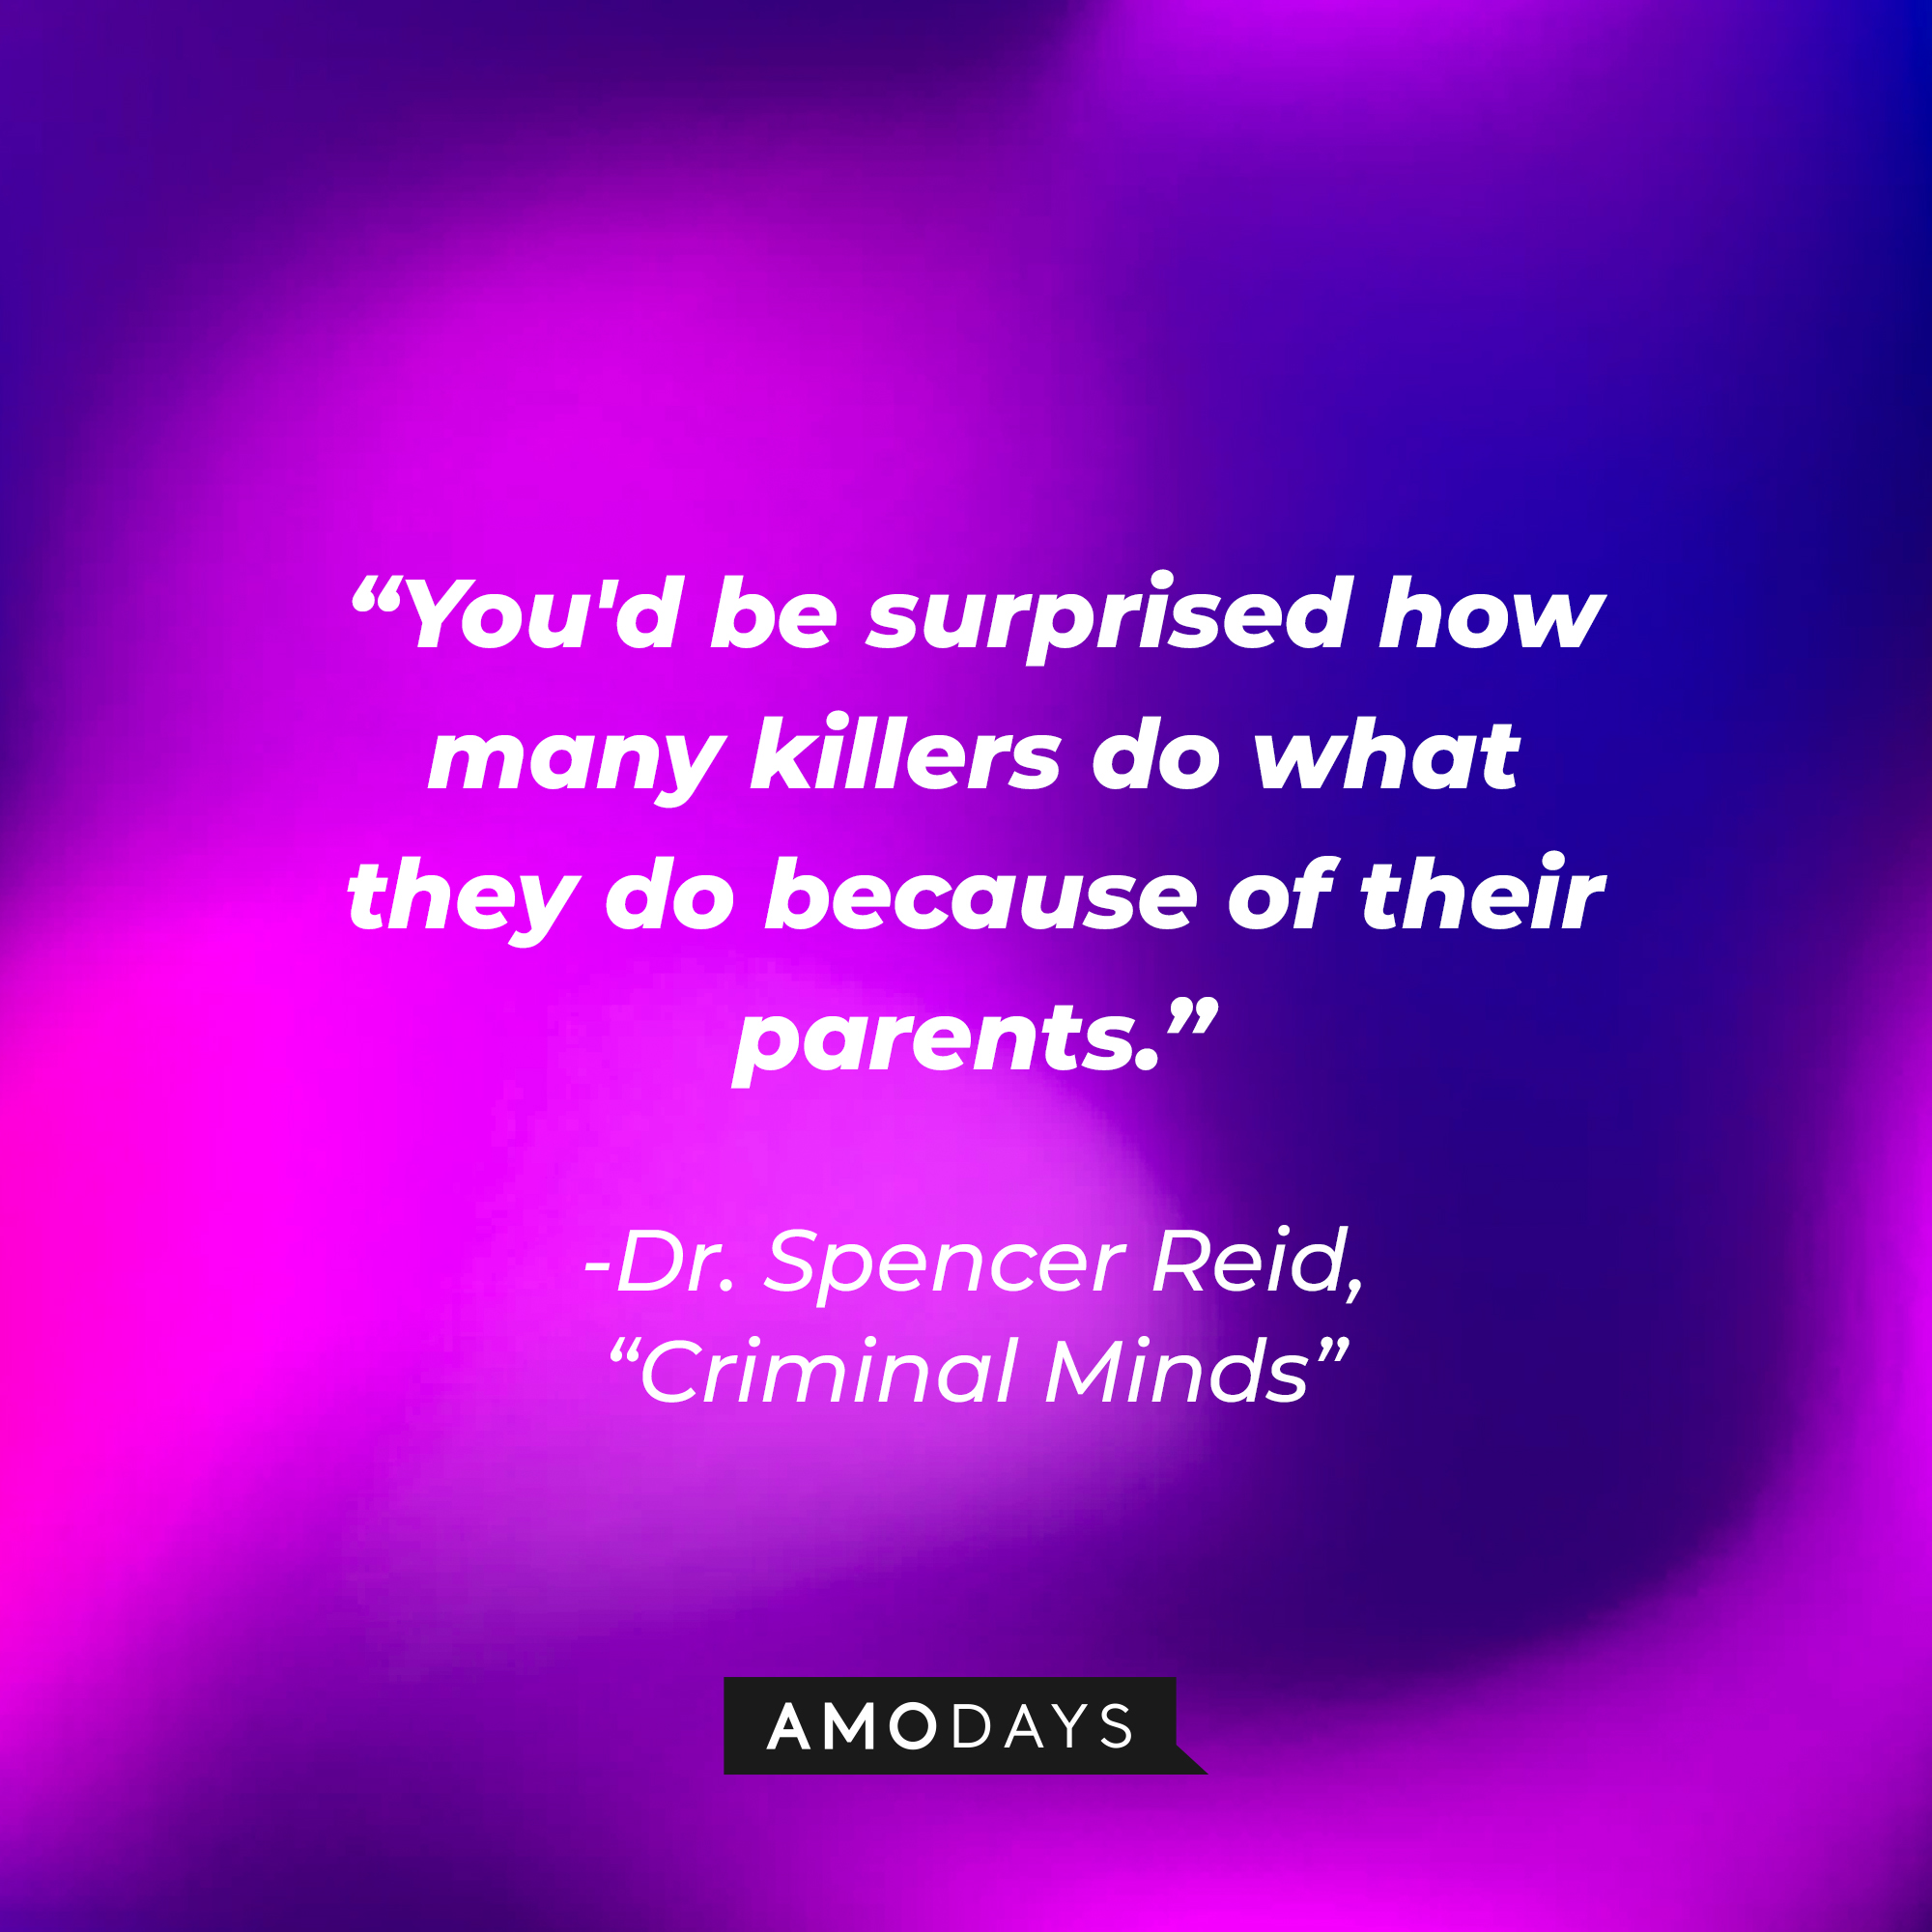 Dr. Spencer Reid's quote: “You'd be surprised how many killers do what they do because of their parents.” | Source: Amodays